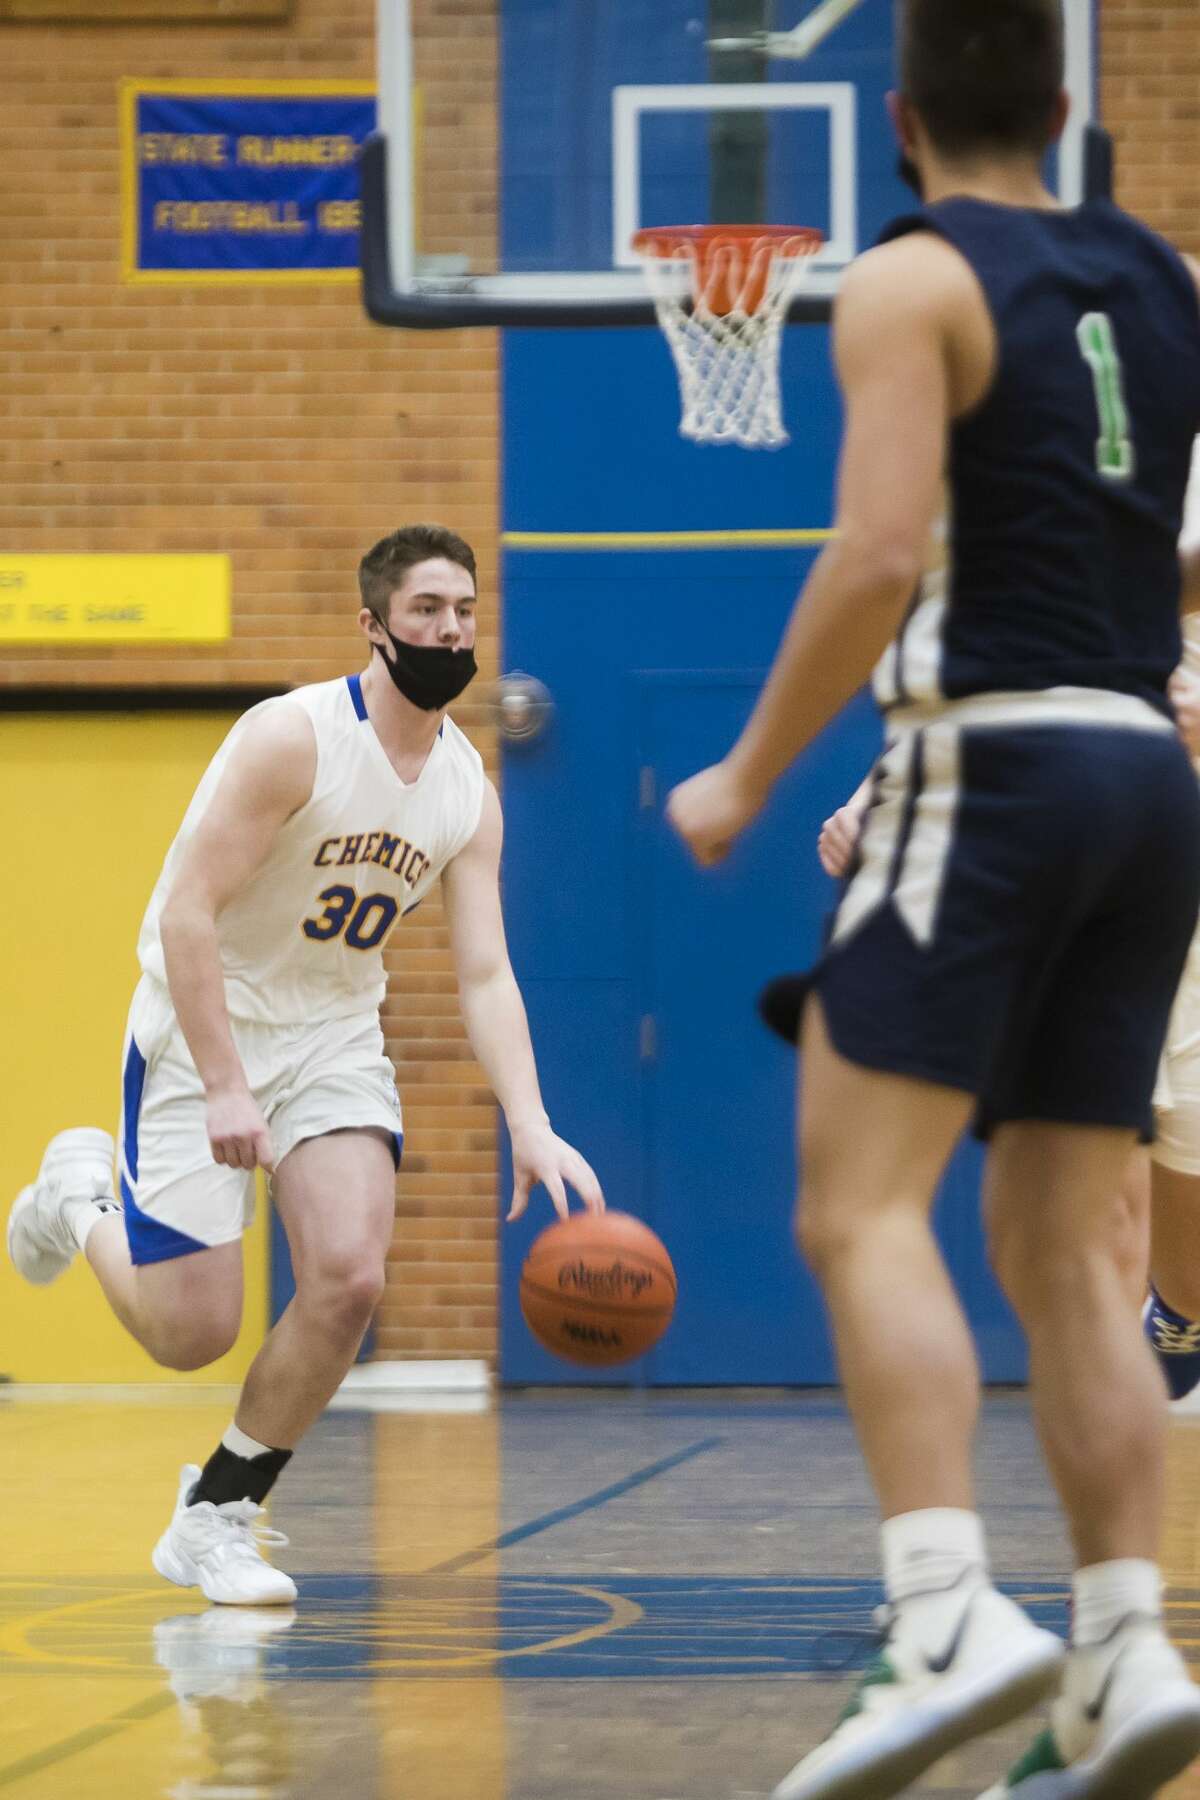 Midland's Drew Barrie dribbles down the court during the Chemics' game against Saginaw Heritage Tuesday, Feb. 9, 2021 at Midland High School. (Katy Kildee/kkildee@mdn.net)